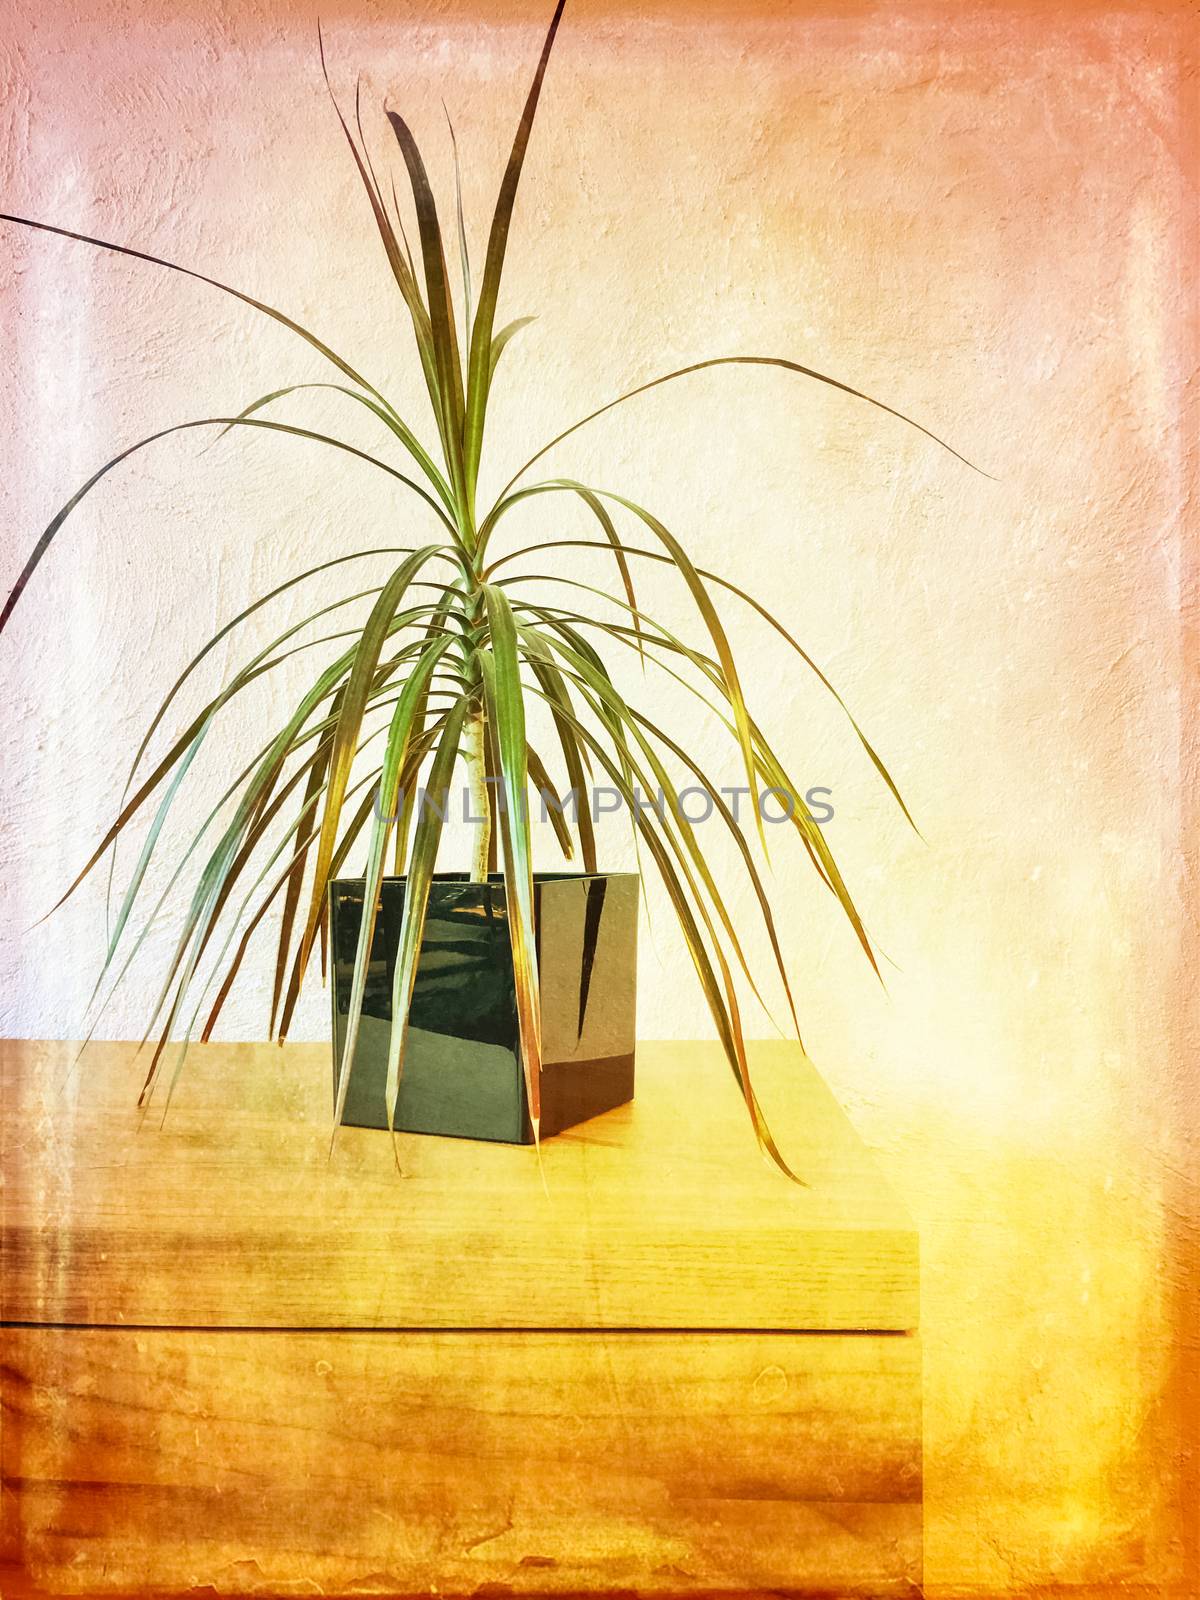 Madagascar dragon tree houseplant on a wooden dresser. Artistic grungy image.